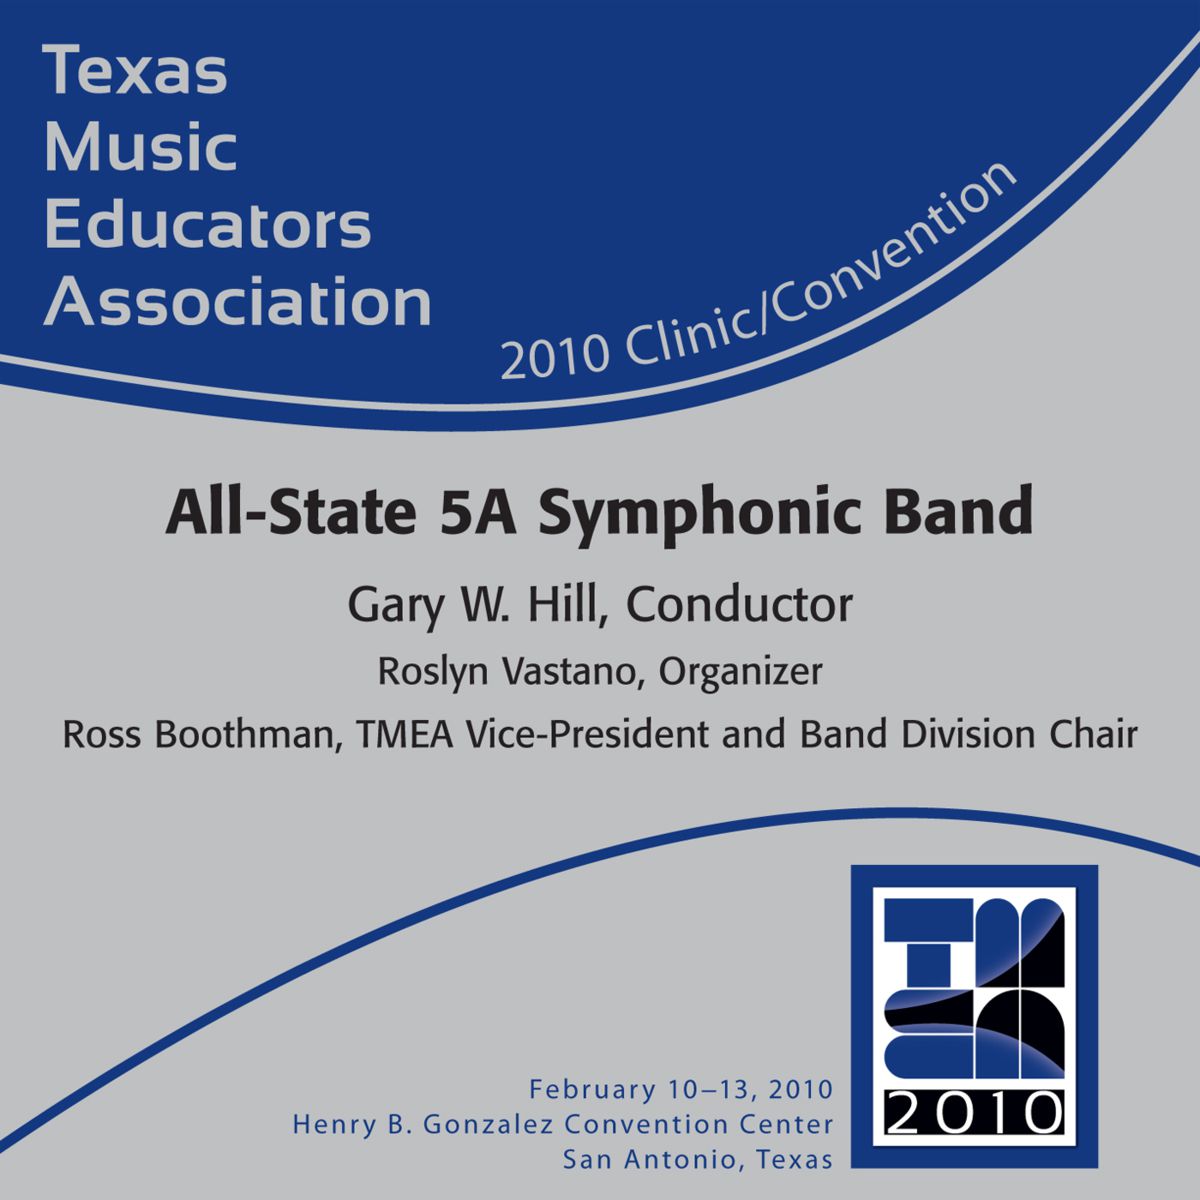 2010 Texas Music Educators Association: All-State 5A Smphonic Band - cliquer ici